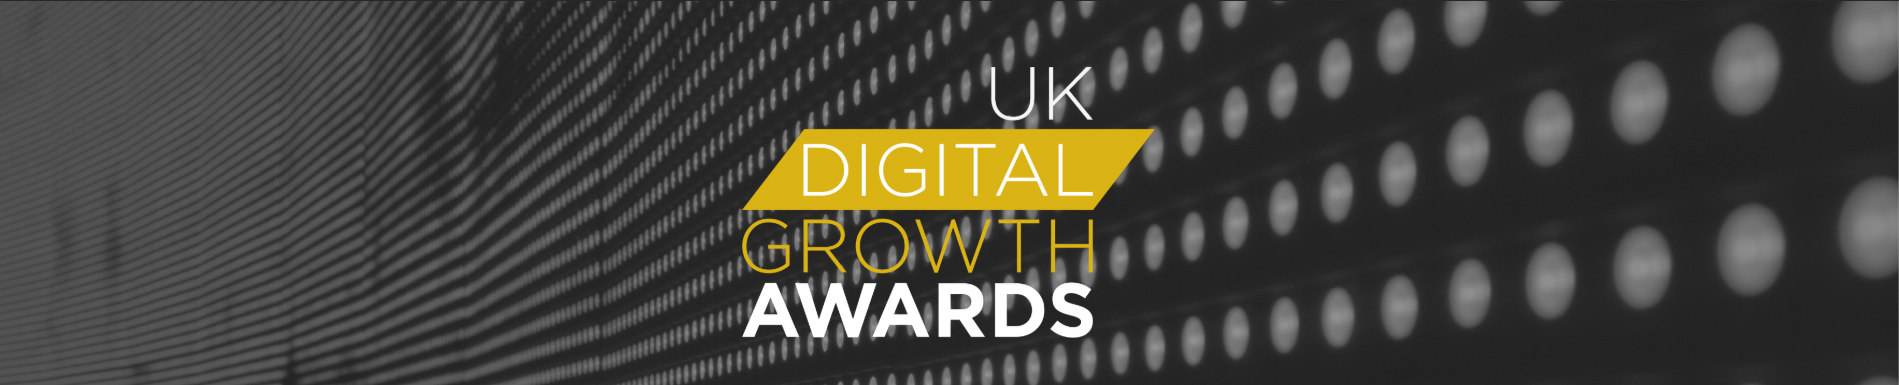 Entyce makes the shortlist for the UK Digital Growth Awards 2019